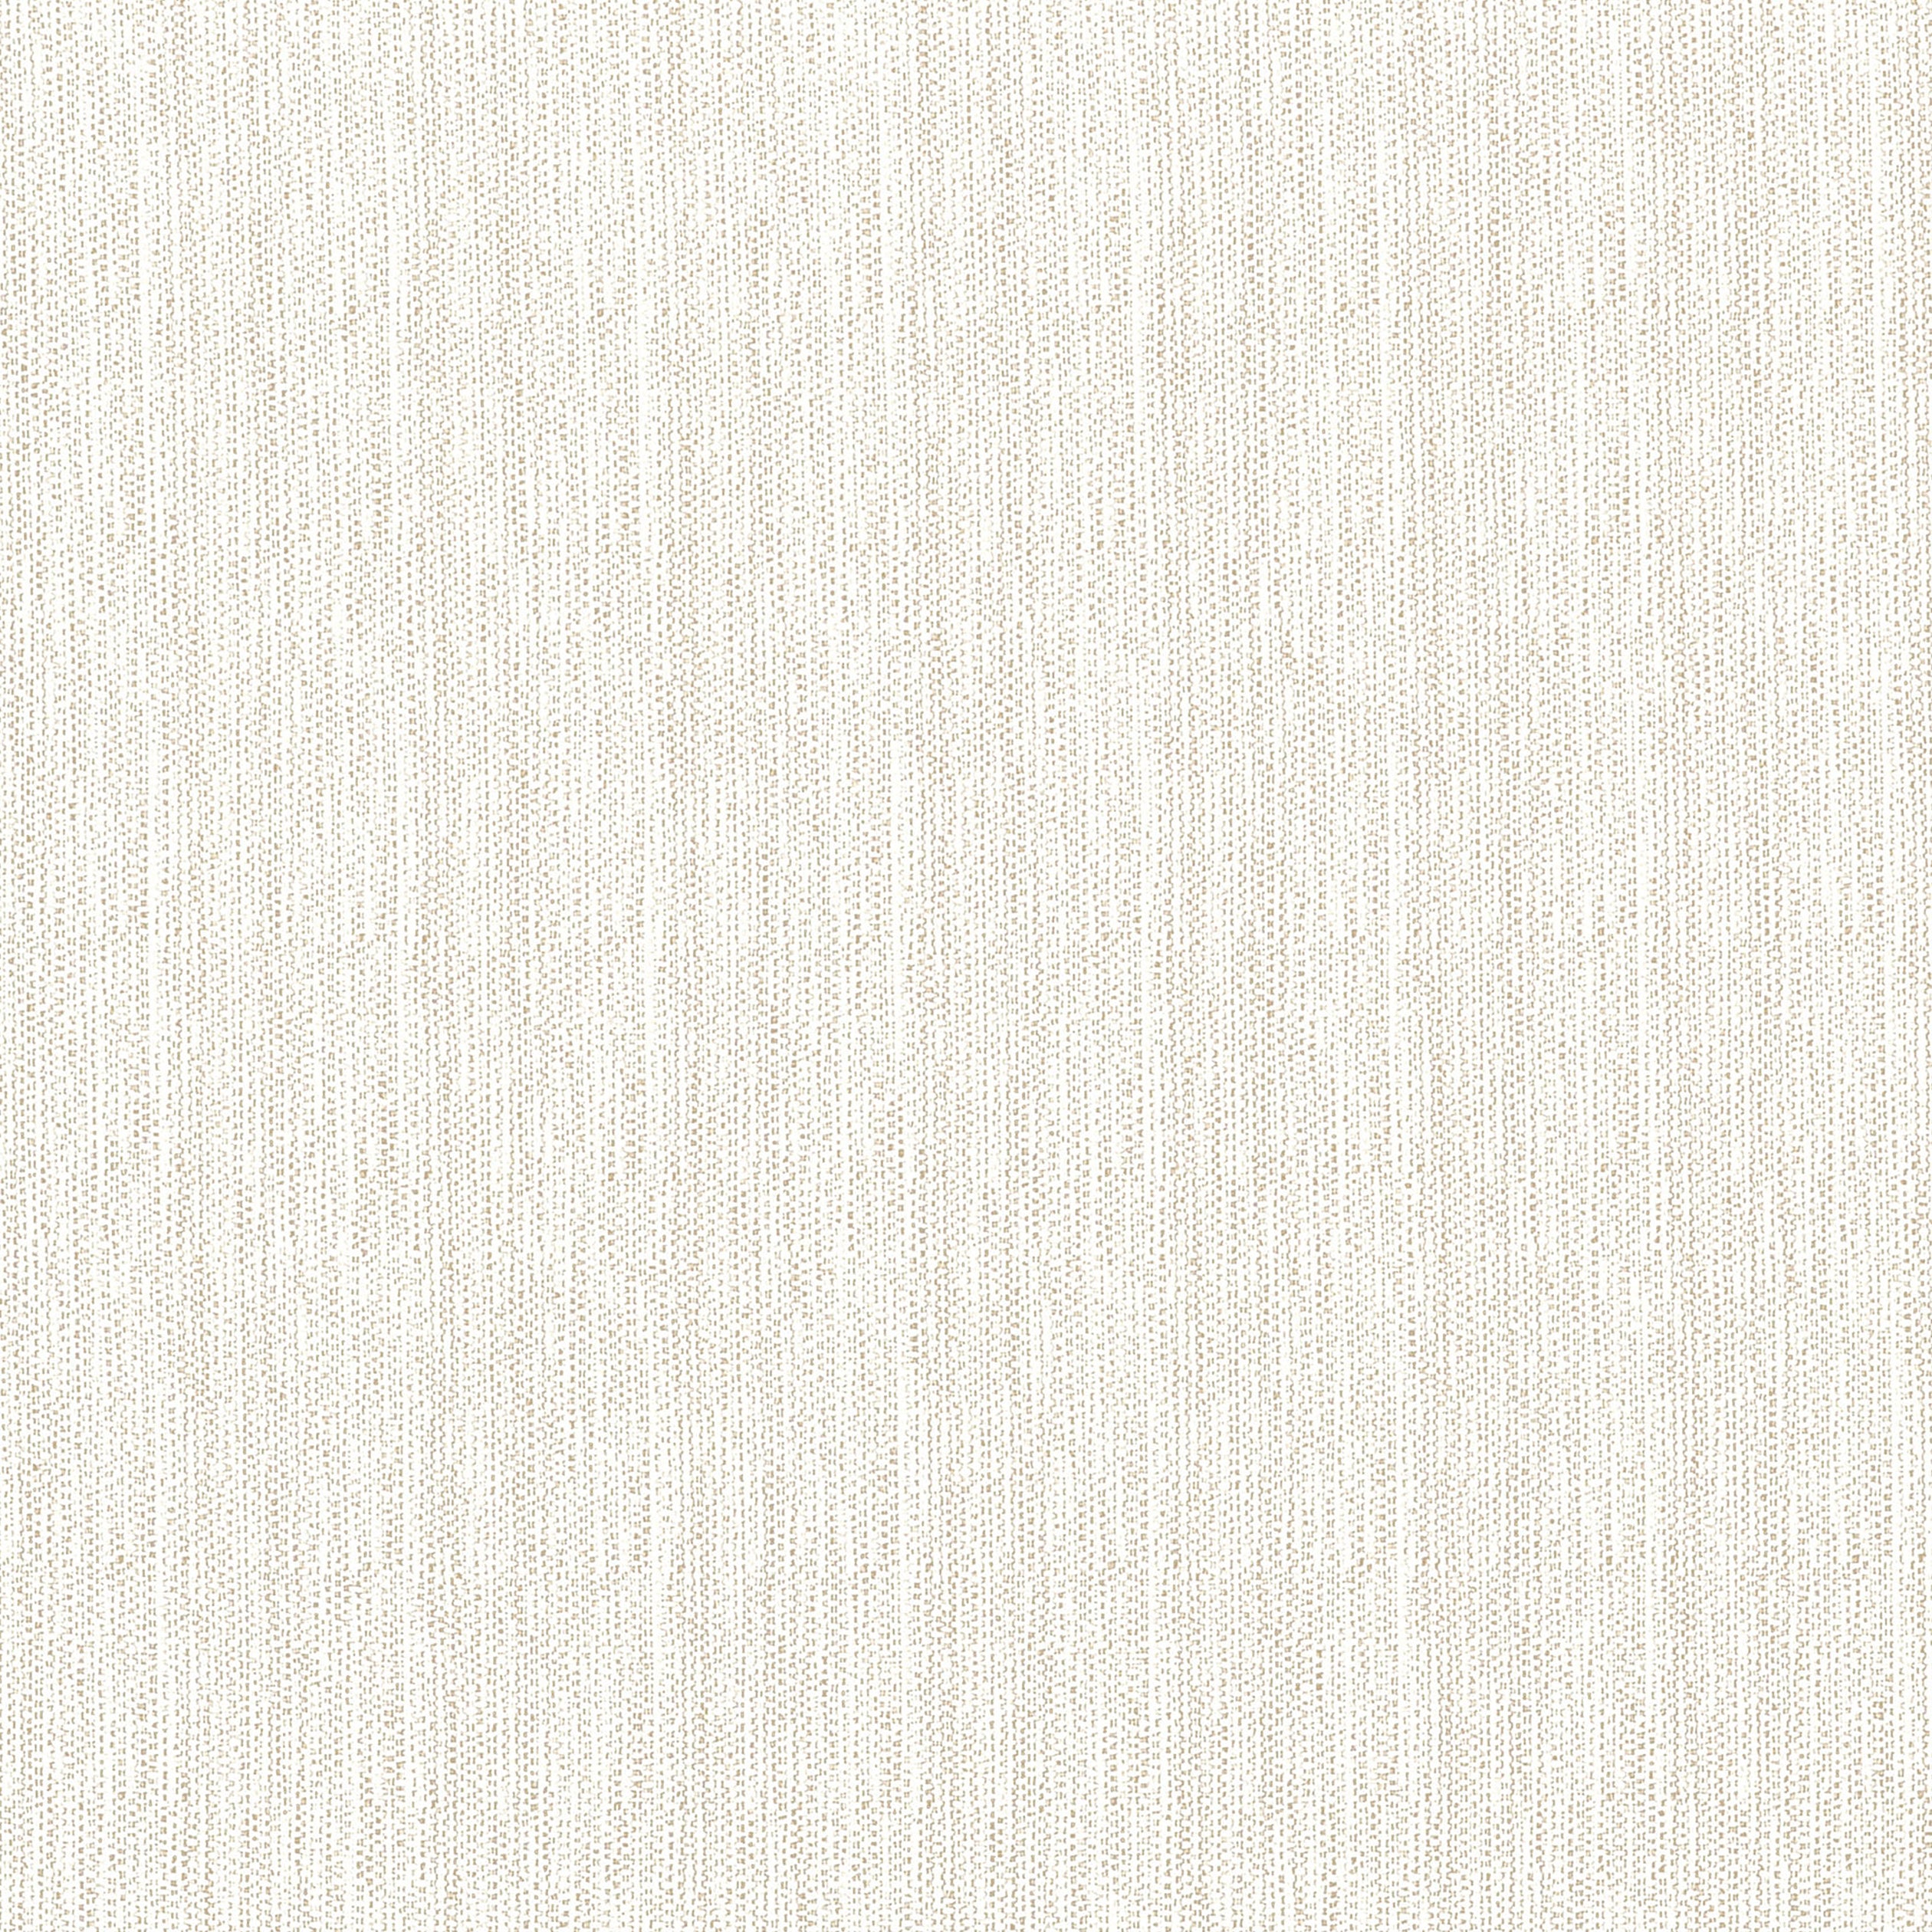 Silas fabric in oatmeal color - pattern number W81620 - by Thibaut in the Locale collection